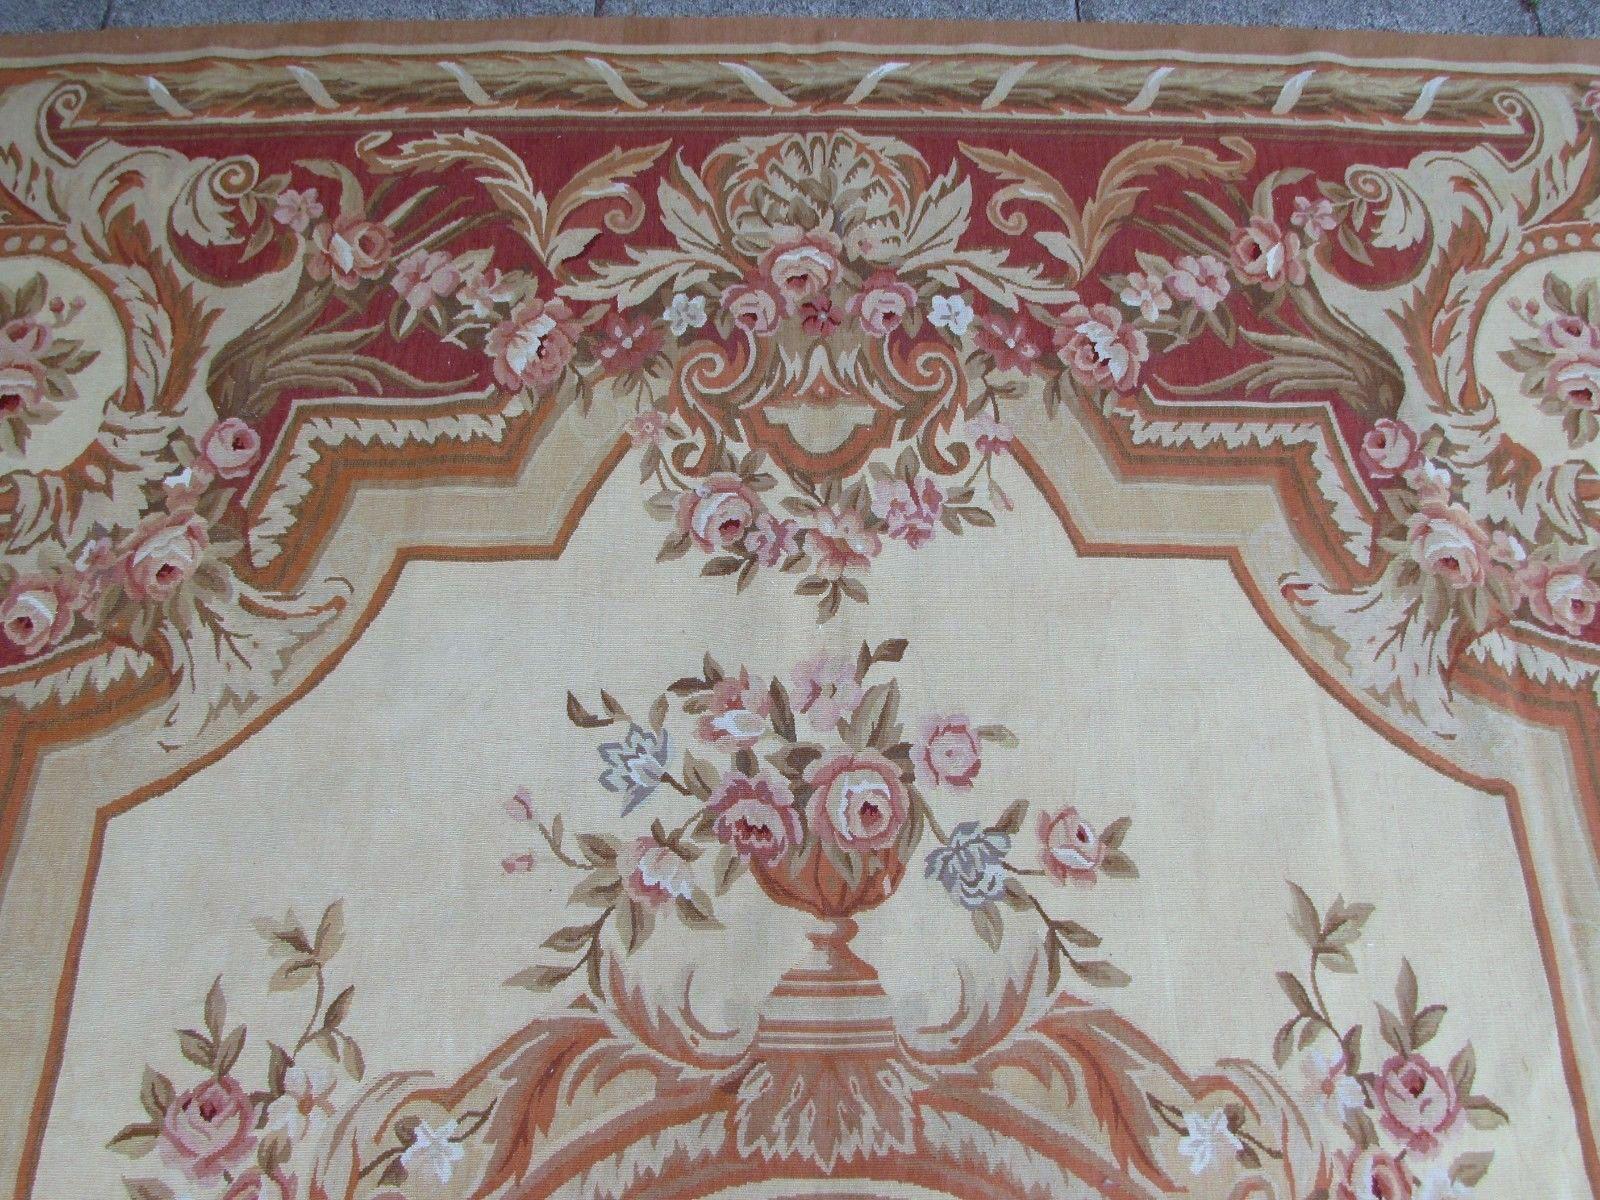 Handmade vintage French Aubusson rug made in wool. This rug has been made in the end of 20th century in original good condition.

-Condition: Original good,

-circa 1980s,

-Size: 8.5' x 12.3' (261cm x 375cm),

-Material: wool,

-Country